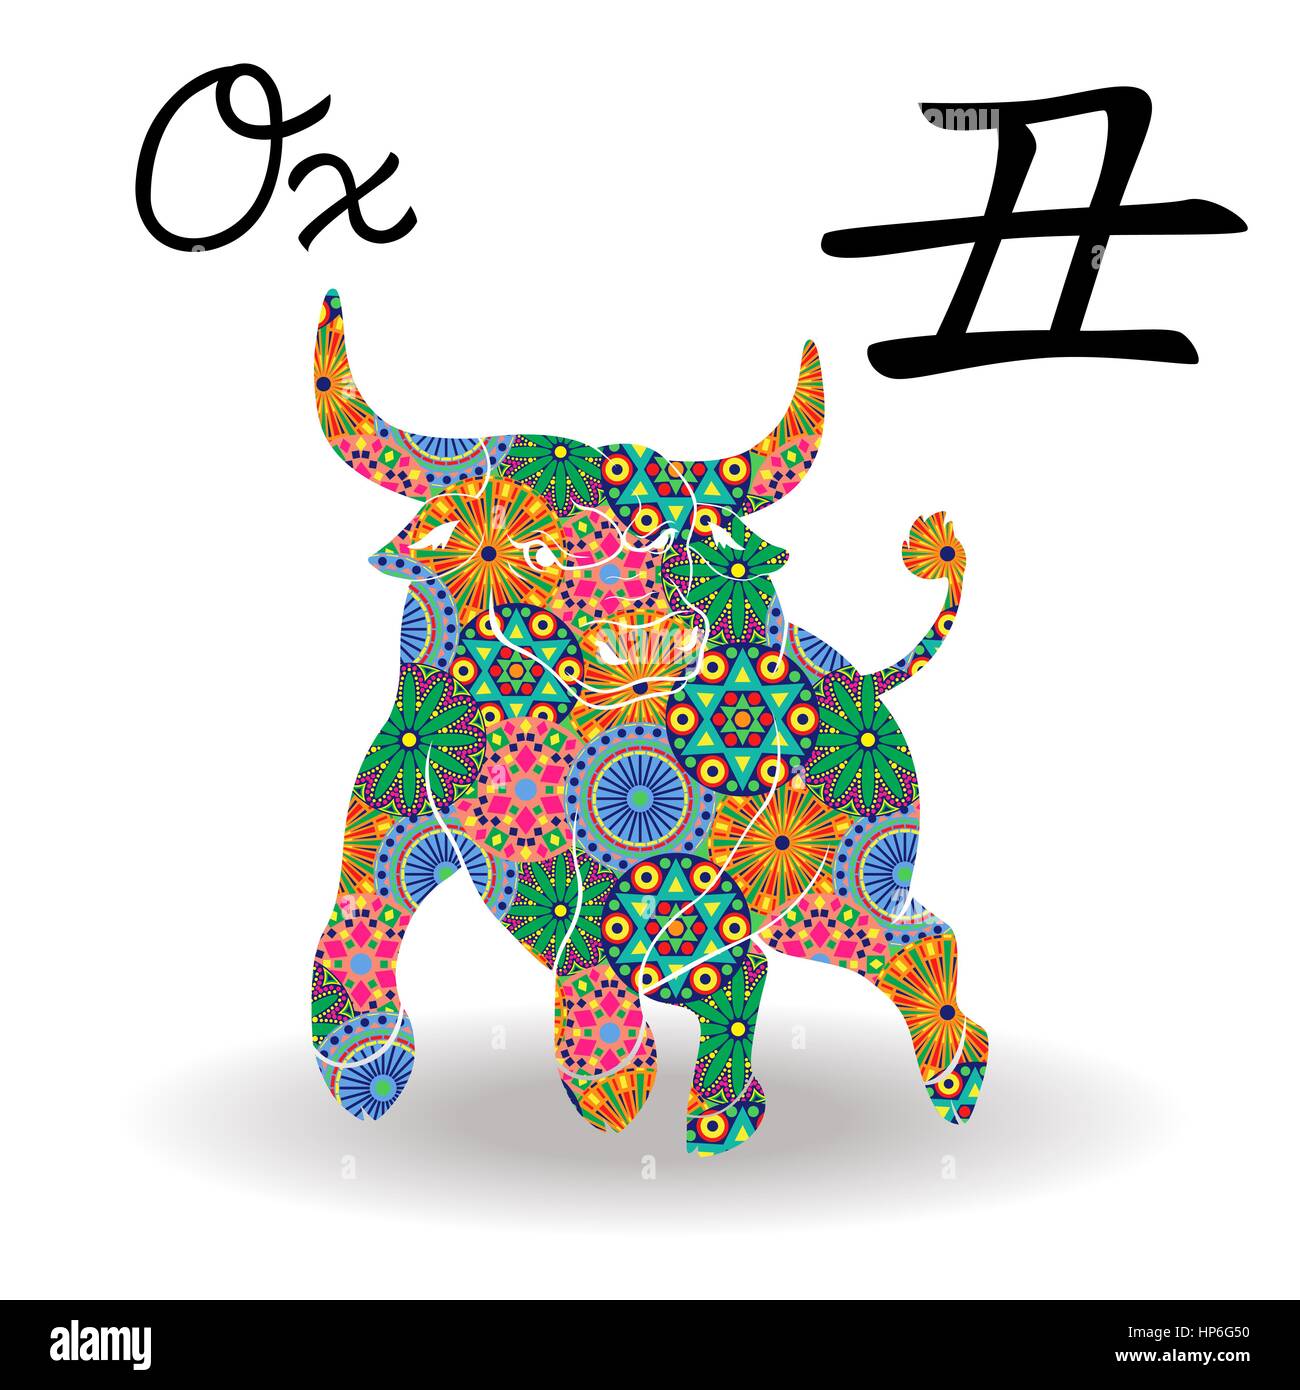 Chinese Zodiac Sign Ox, Fixed Element Earth, symbol of New Year on the